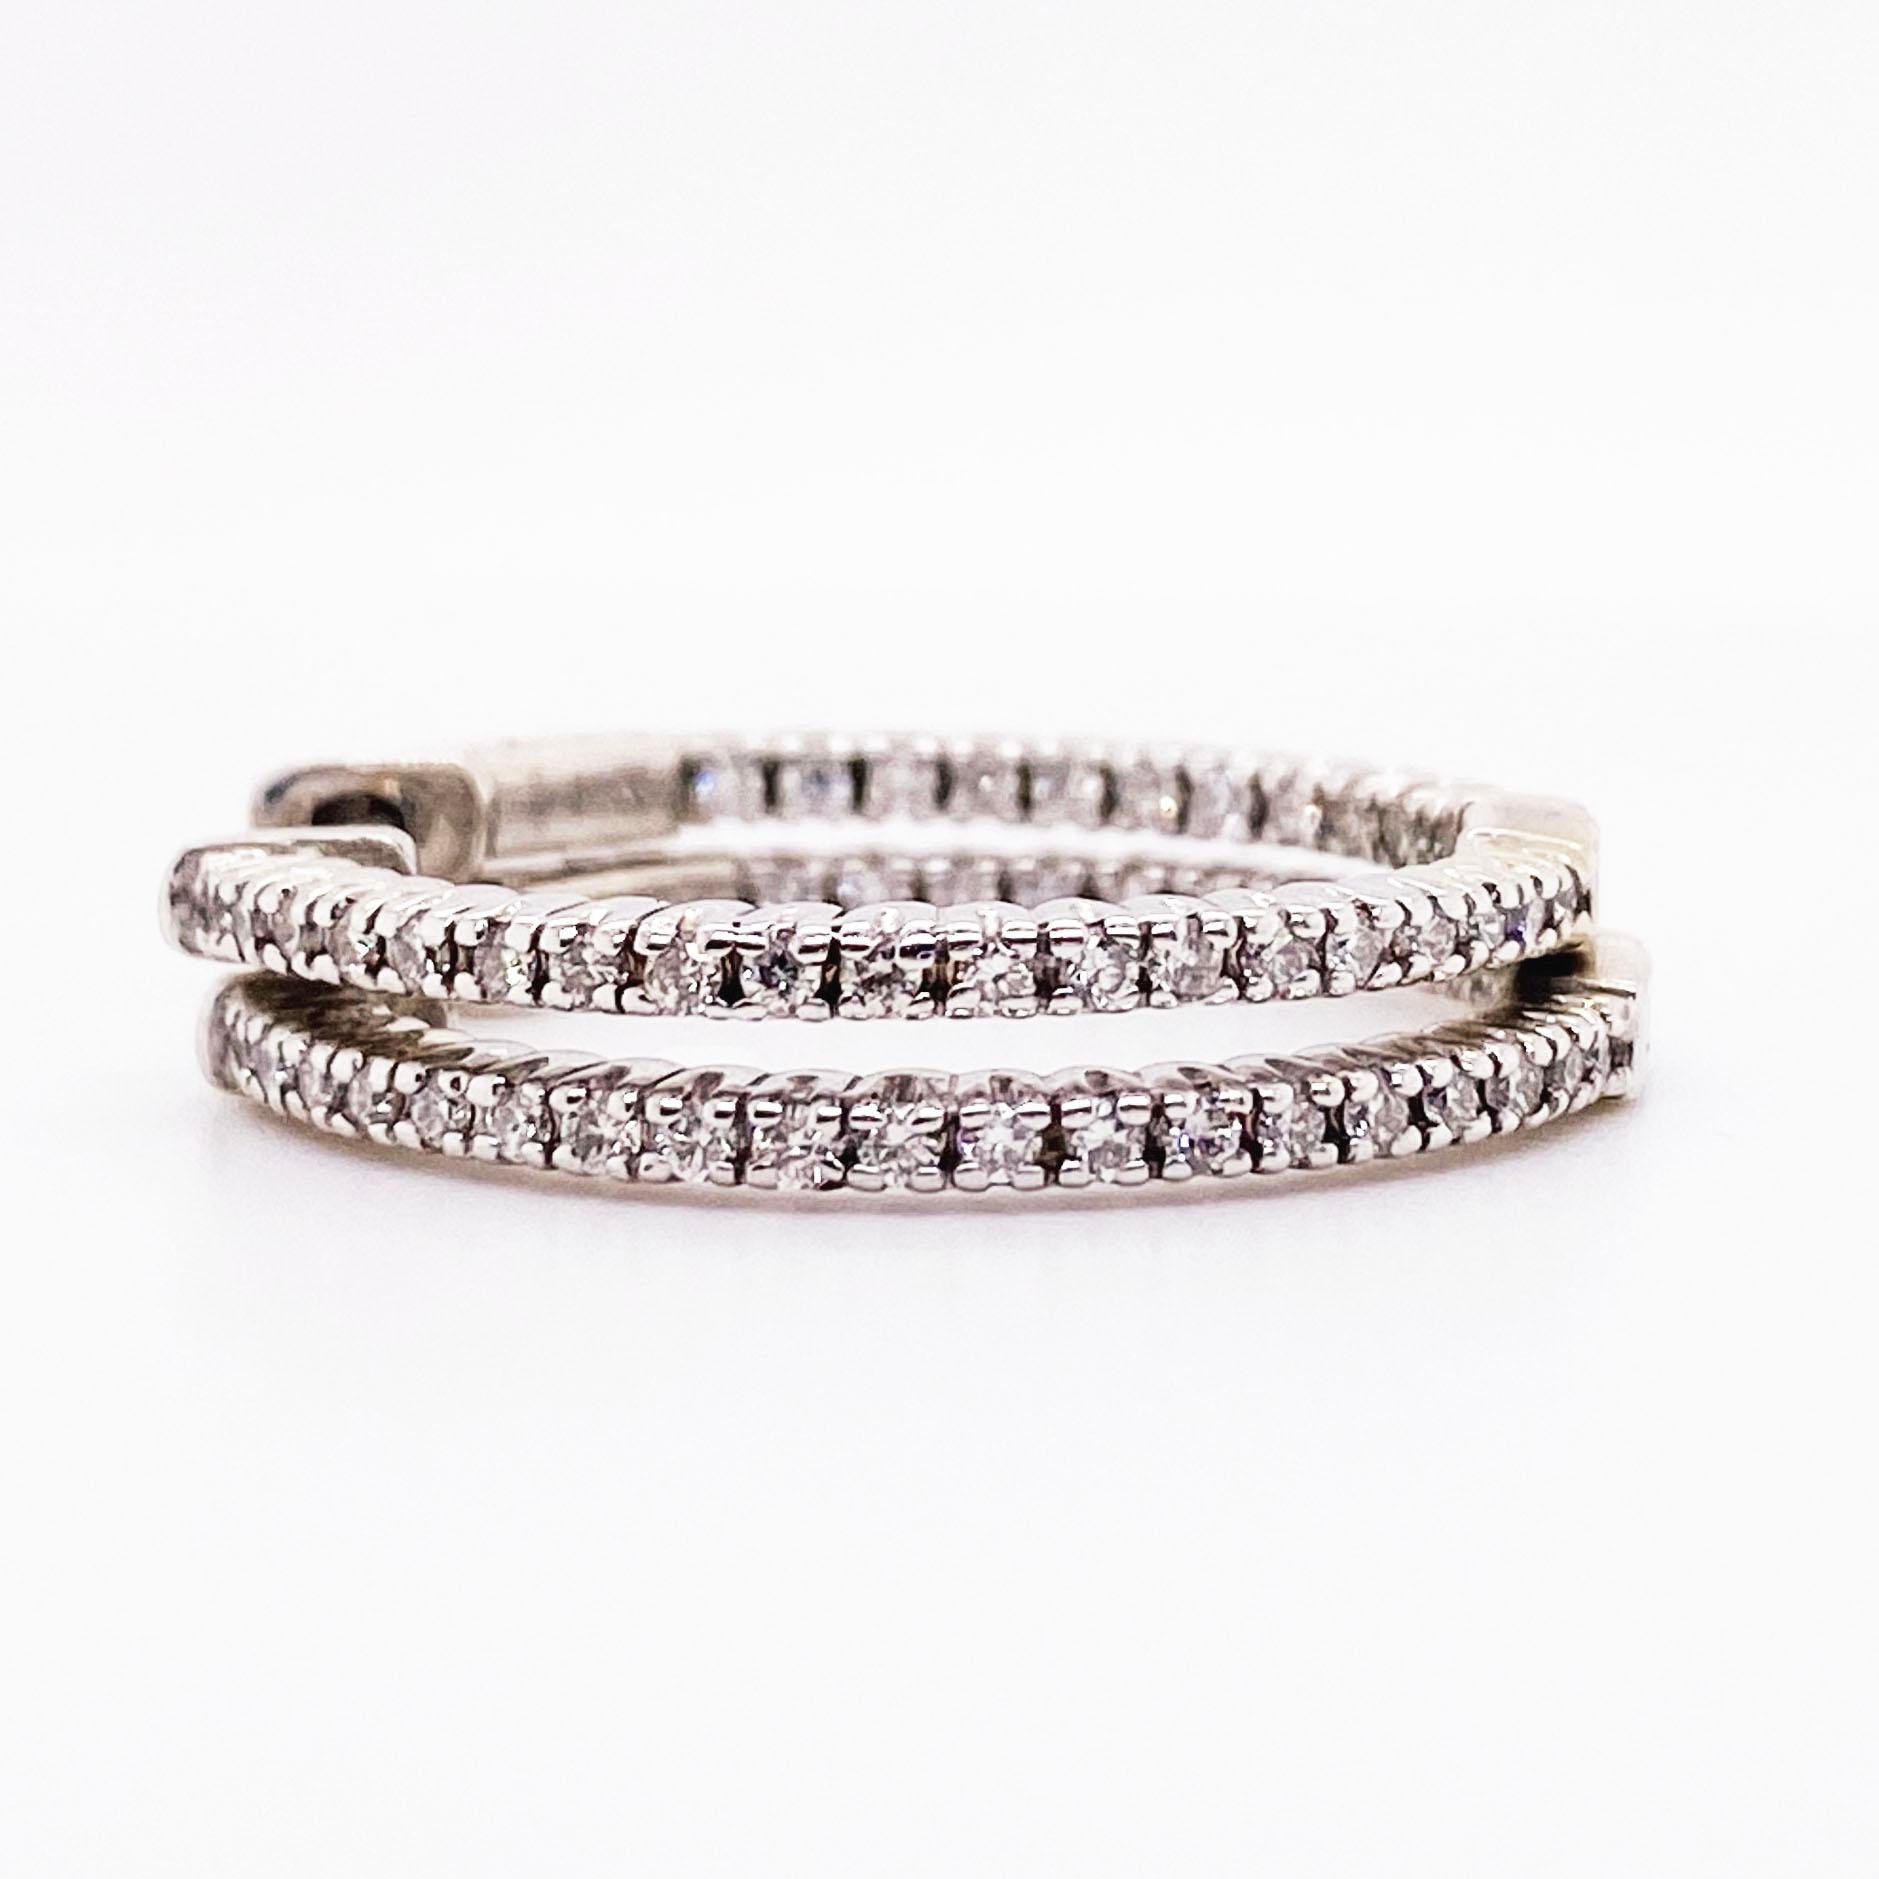 These diamond inside out hoops are a staple in any fine jewelry collection. The 1 inch diameter is a perfect size for any occasion. They can be worn casually or for a more formal event. The hoops have round brilliant diamonds covering the top front